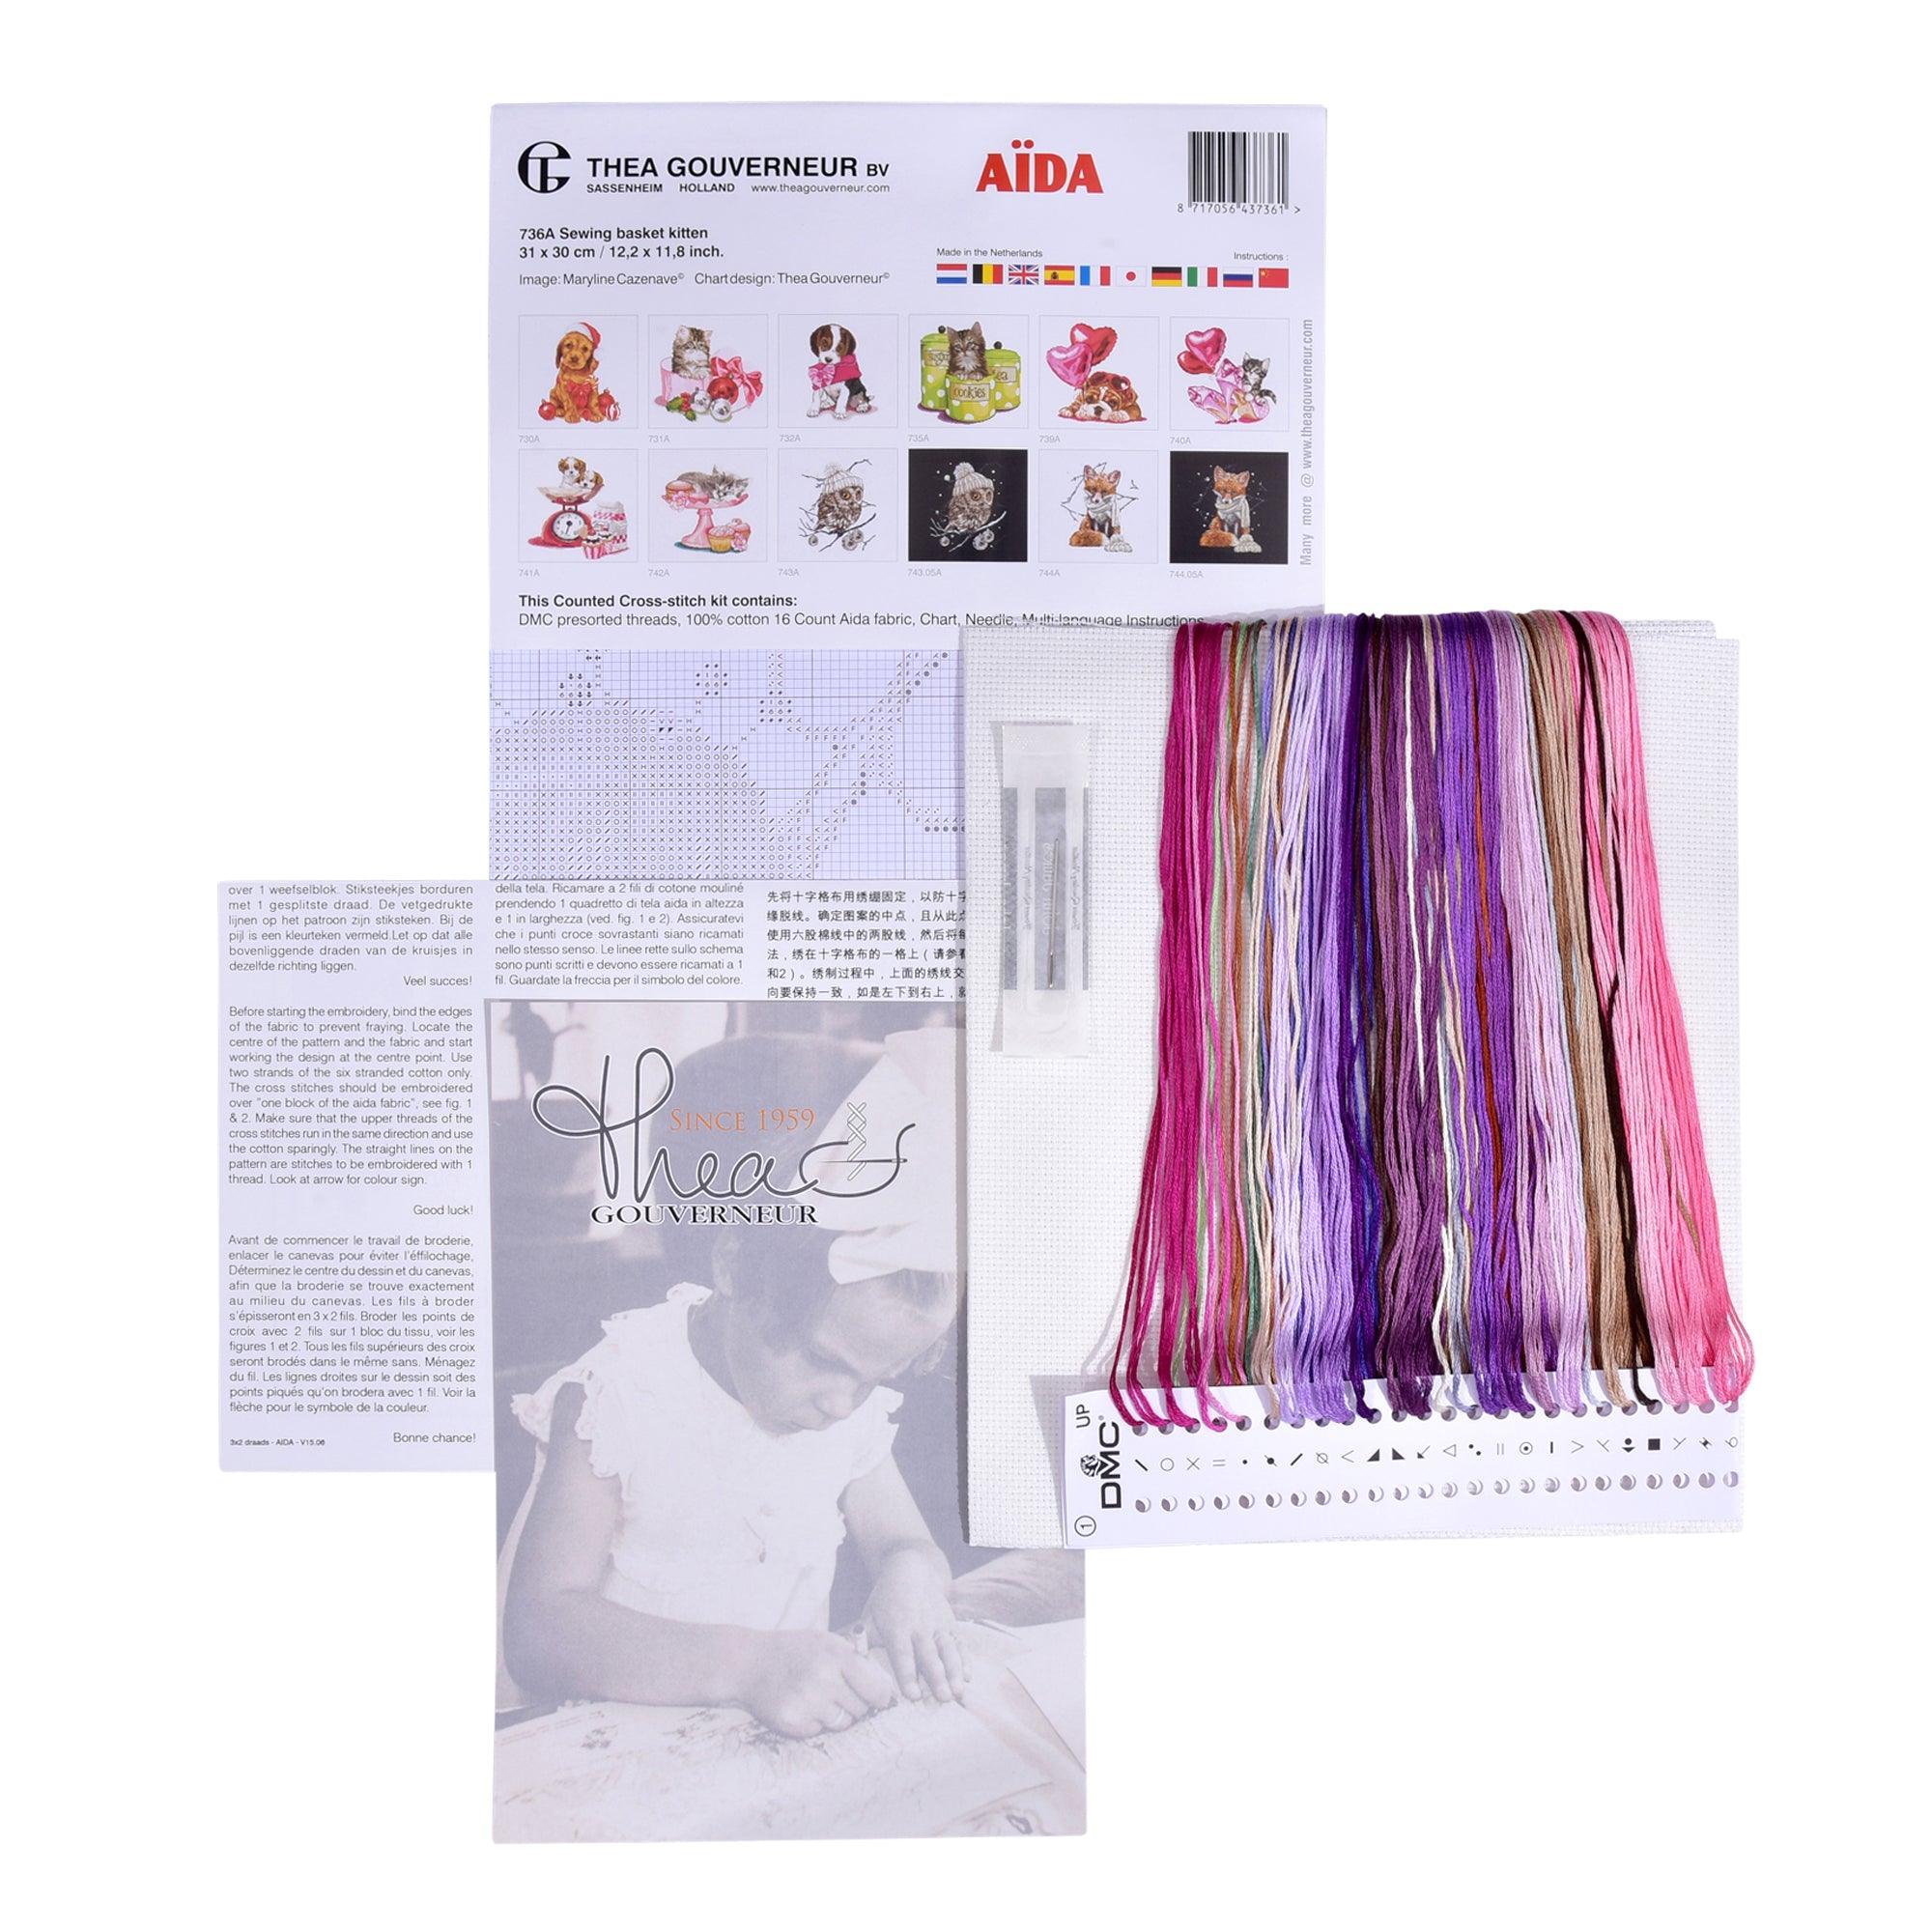 Thea Gouverneur Sewing Basket Kitten - Aida - 16 count - 736A